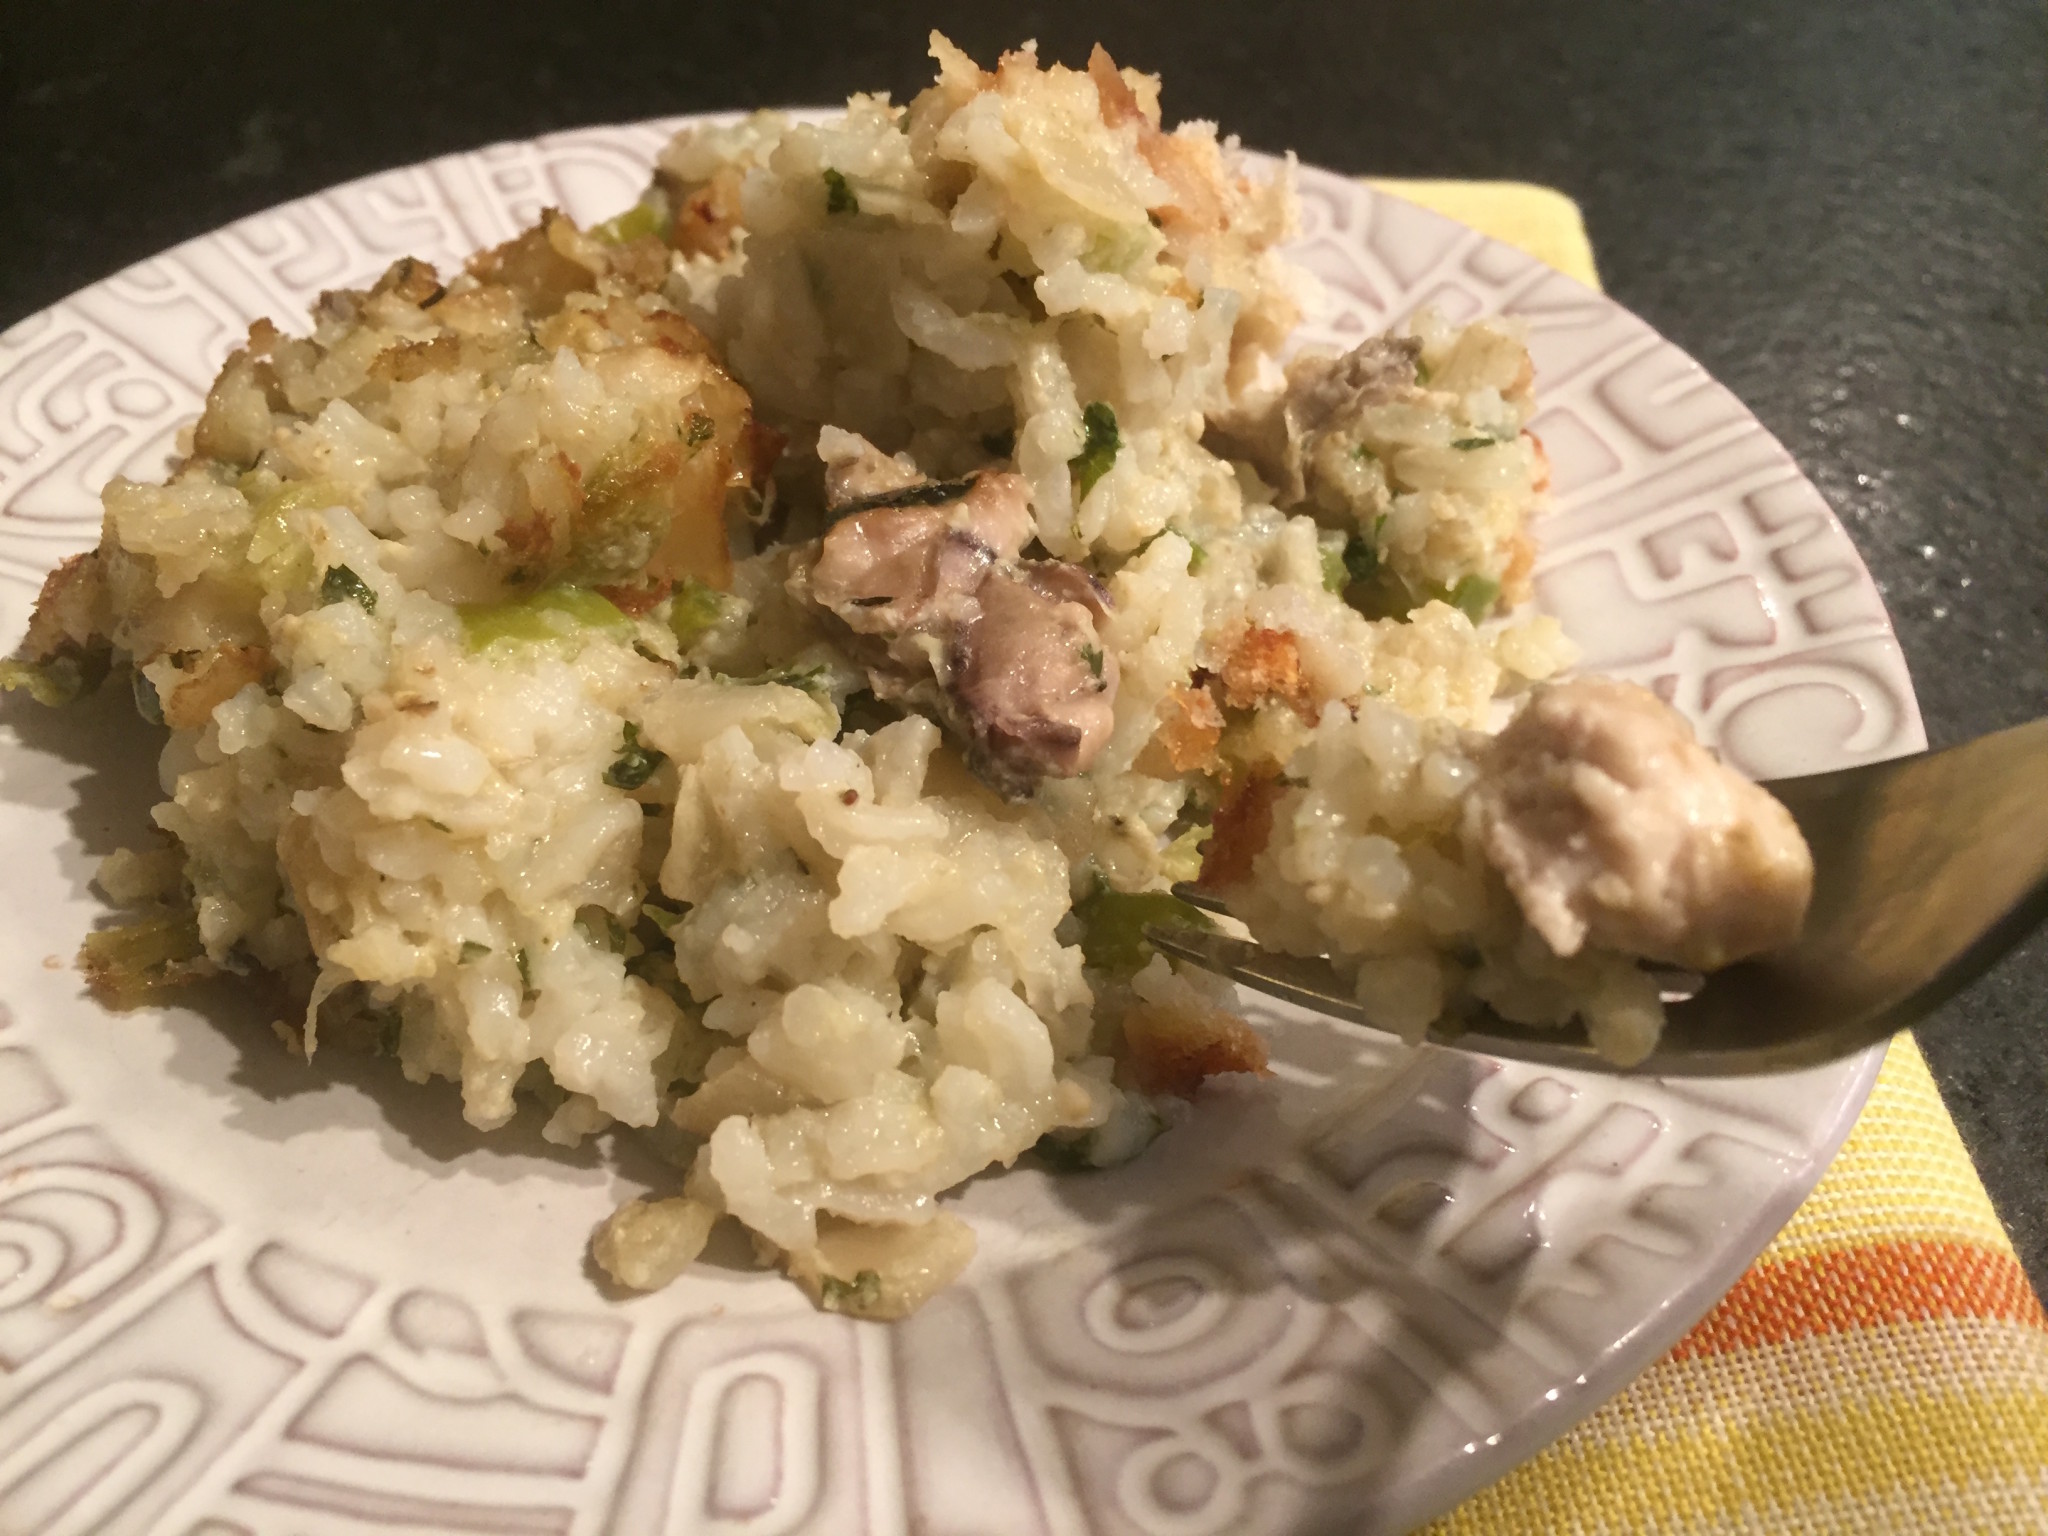 Serving of Craig Claiborne's oyster and rice dressing recipe from the New York Times (1987).